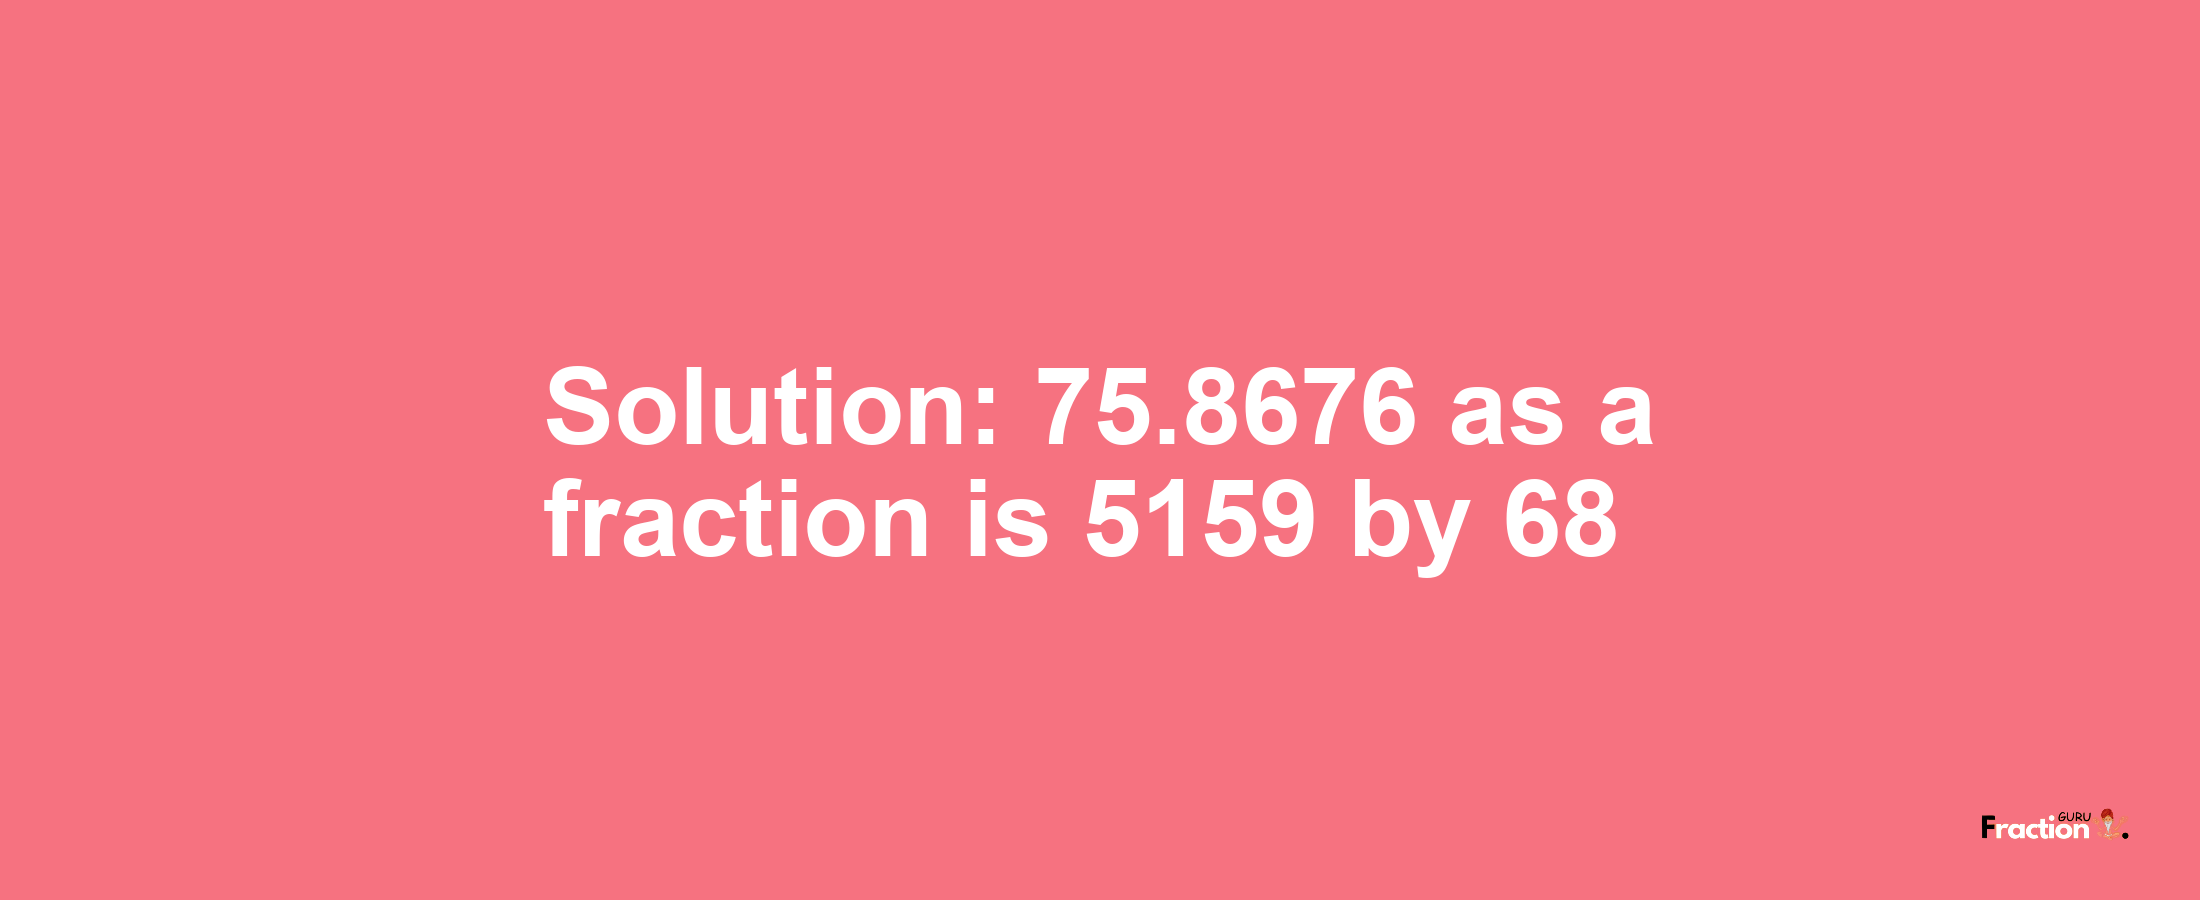 Solution:75.8676 as a fraction is 5159/68